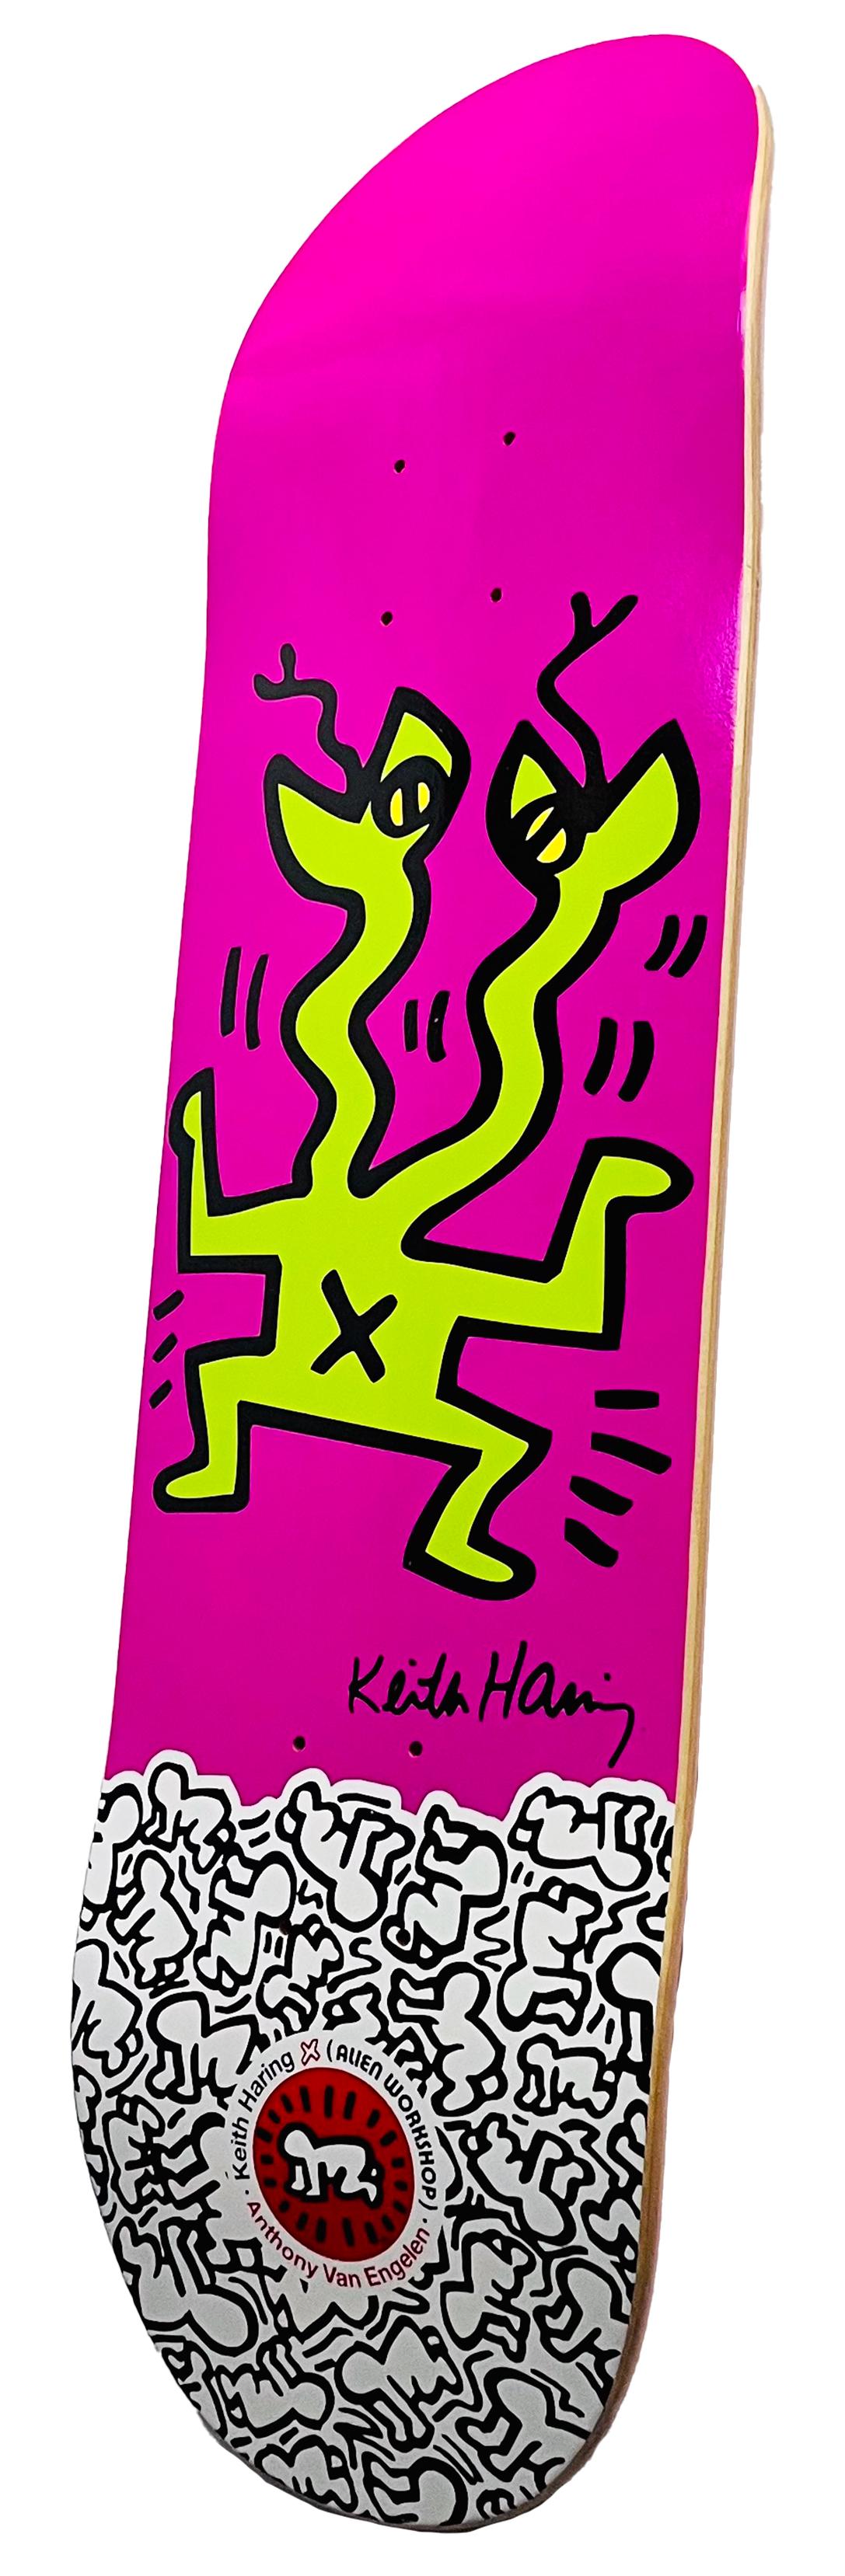 Keith Haring Skateboard Deck (Keith Haring snakes) - Sculpture by (after) Keith Haring